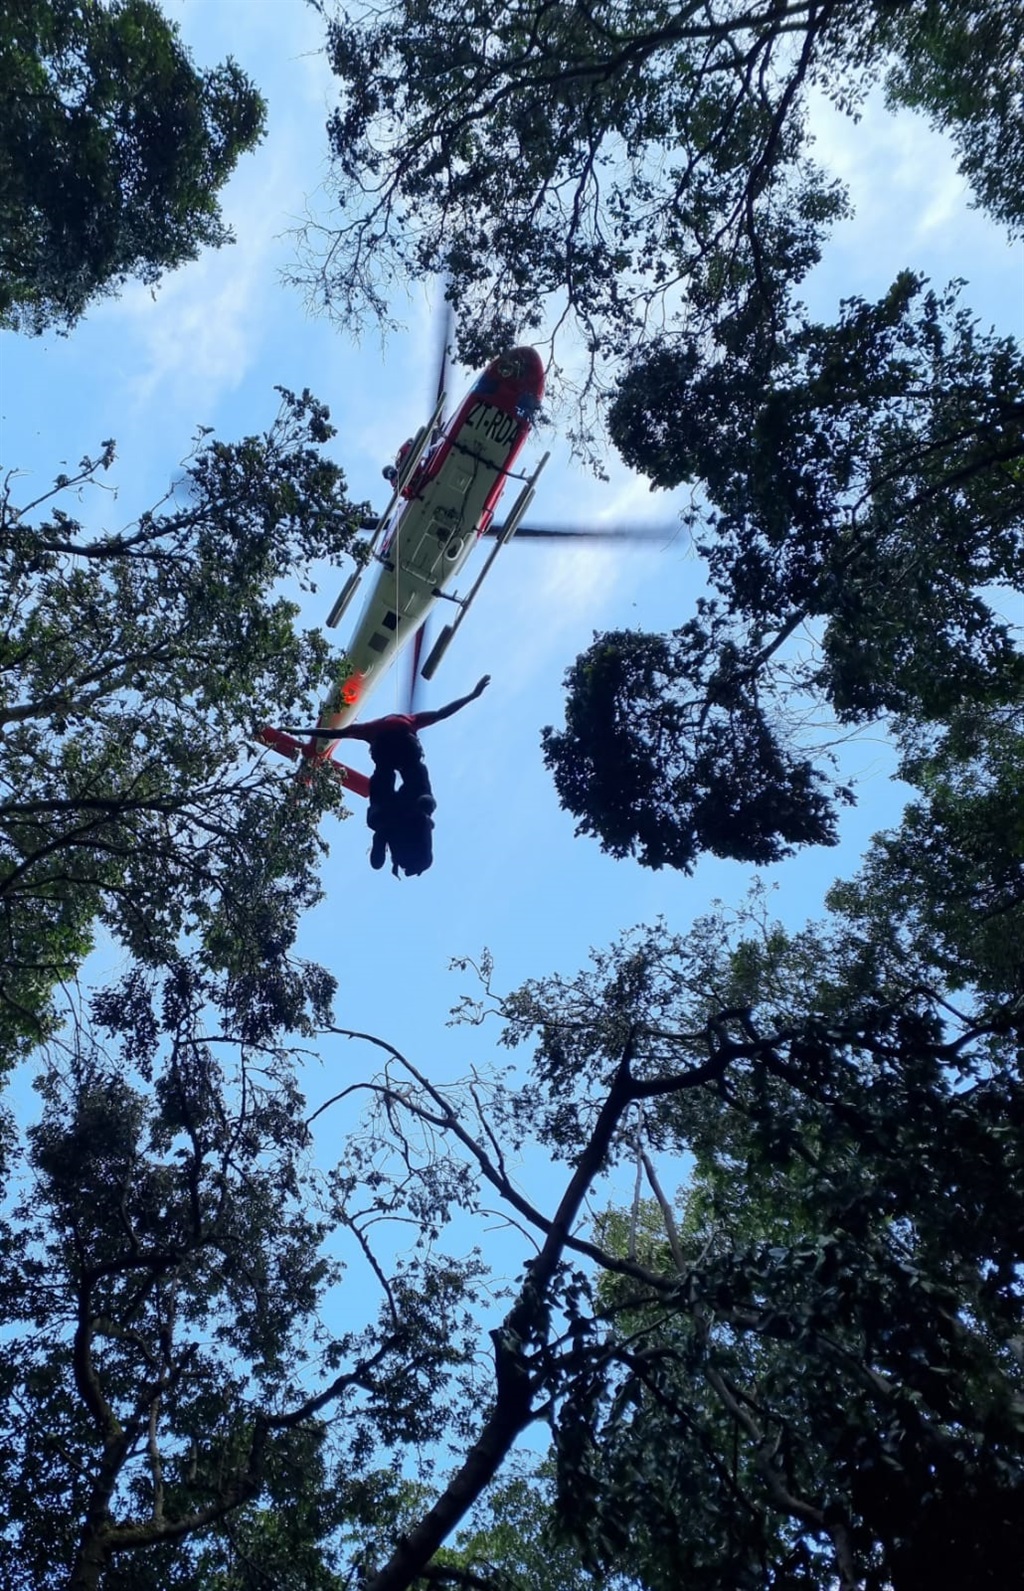 47-year-old hiker rescued by helicopter